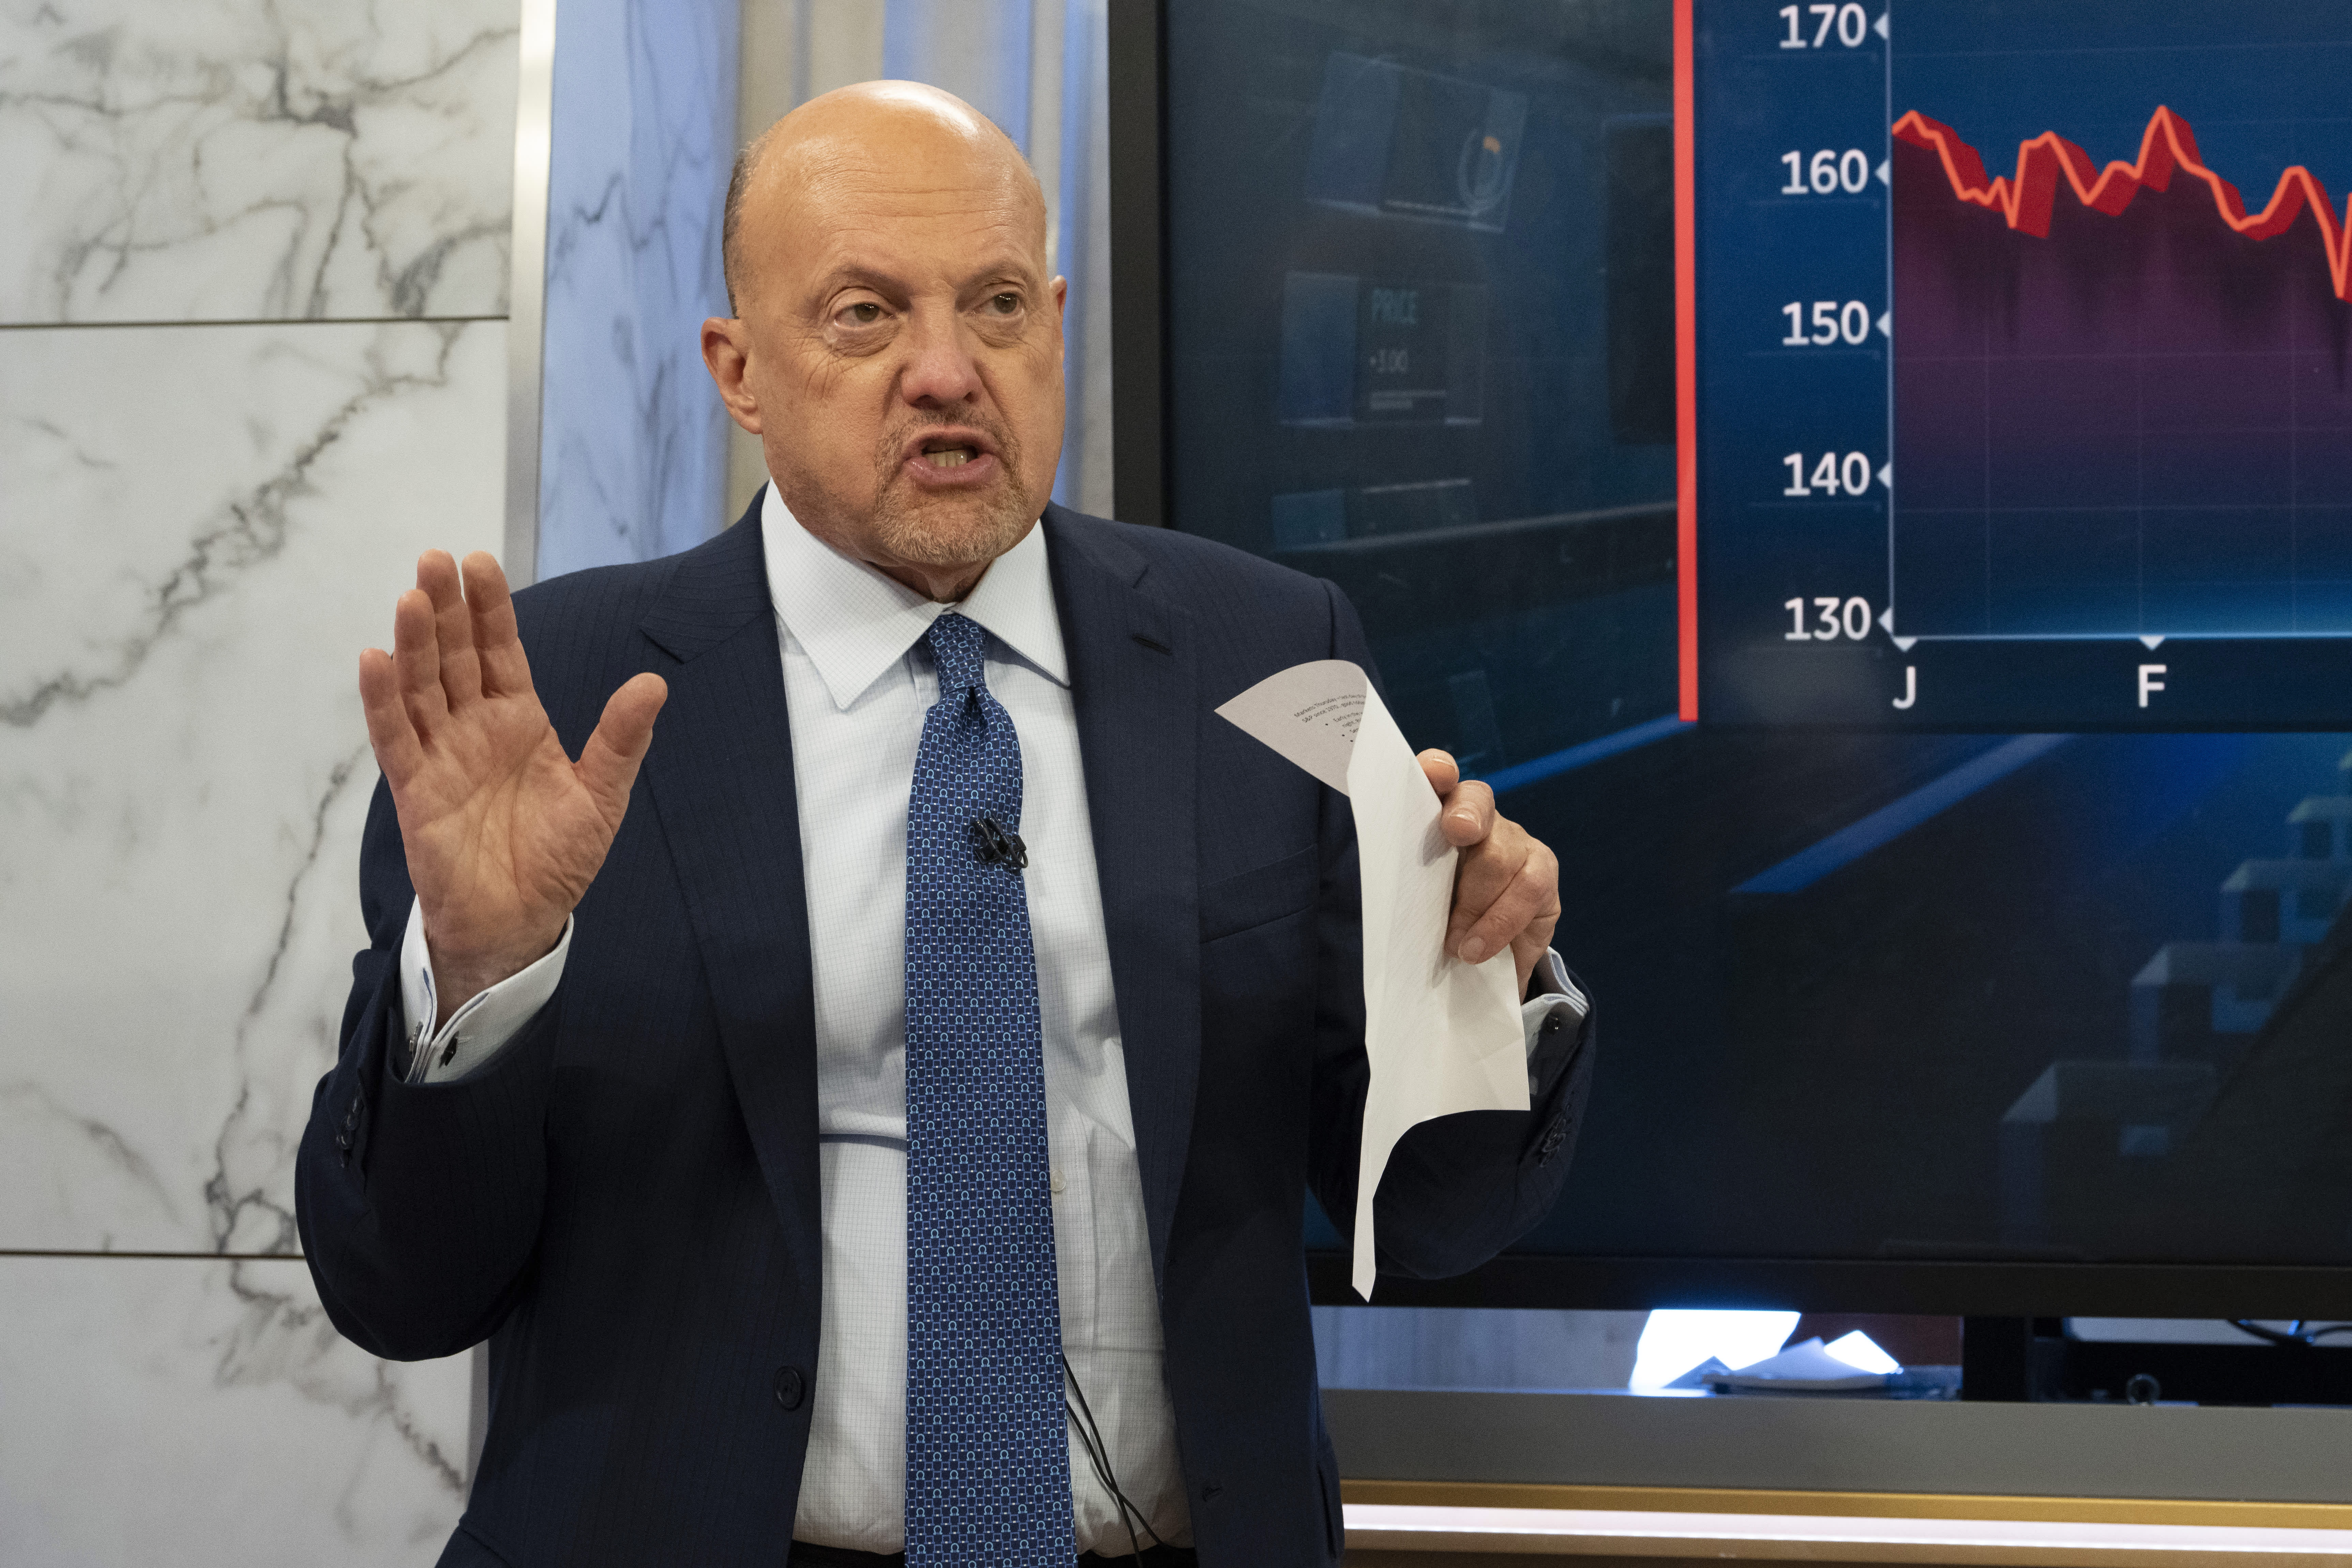 Jim Cramer's Investing Club Meeting Wednesday: Santa Claus Rally, Down and Out Buy, Starbucks Call, Sunday Ticket